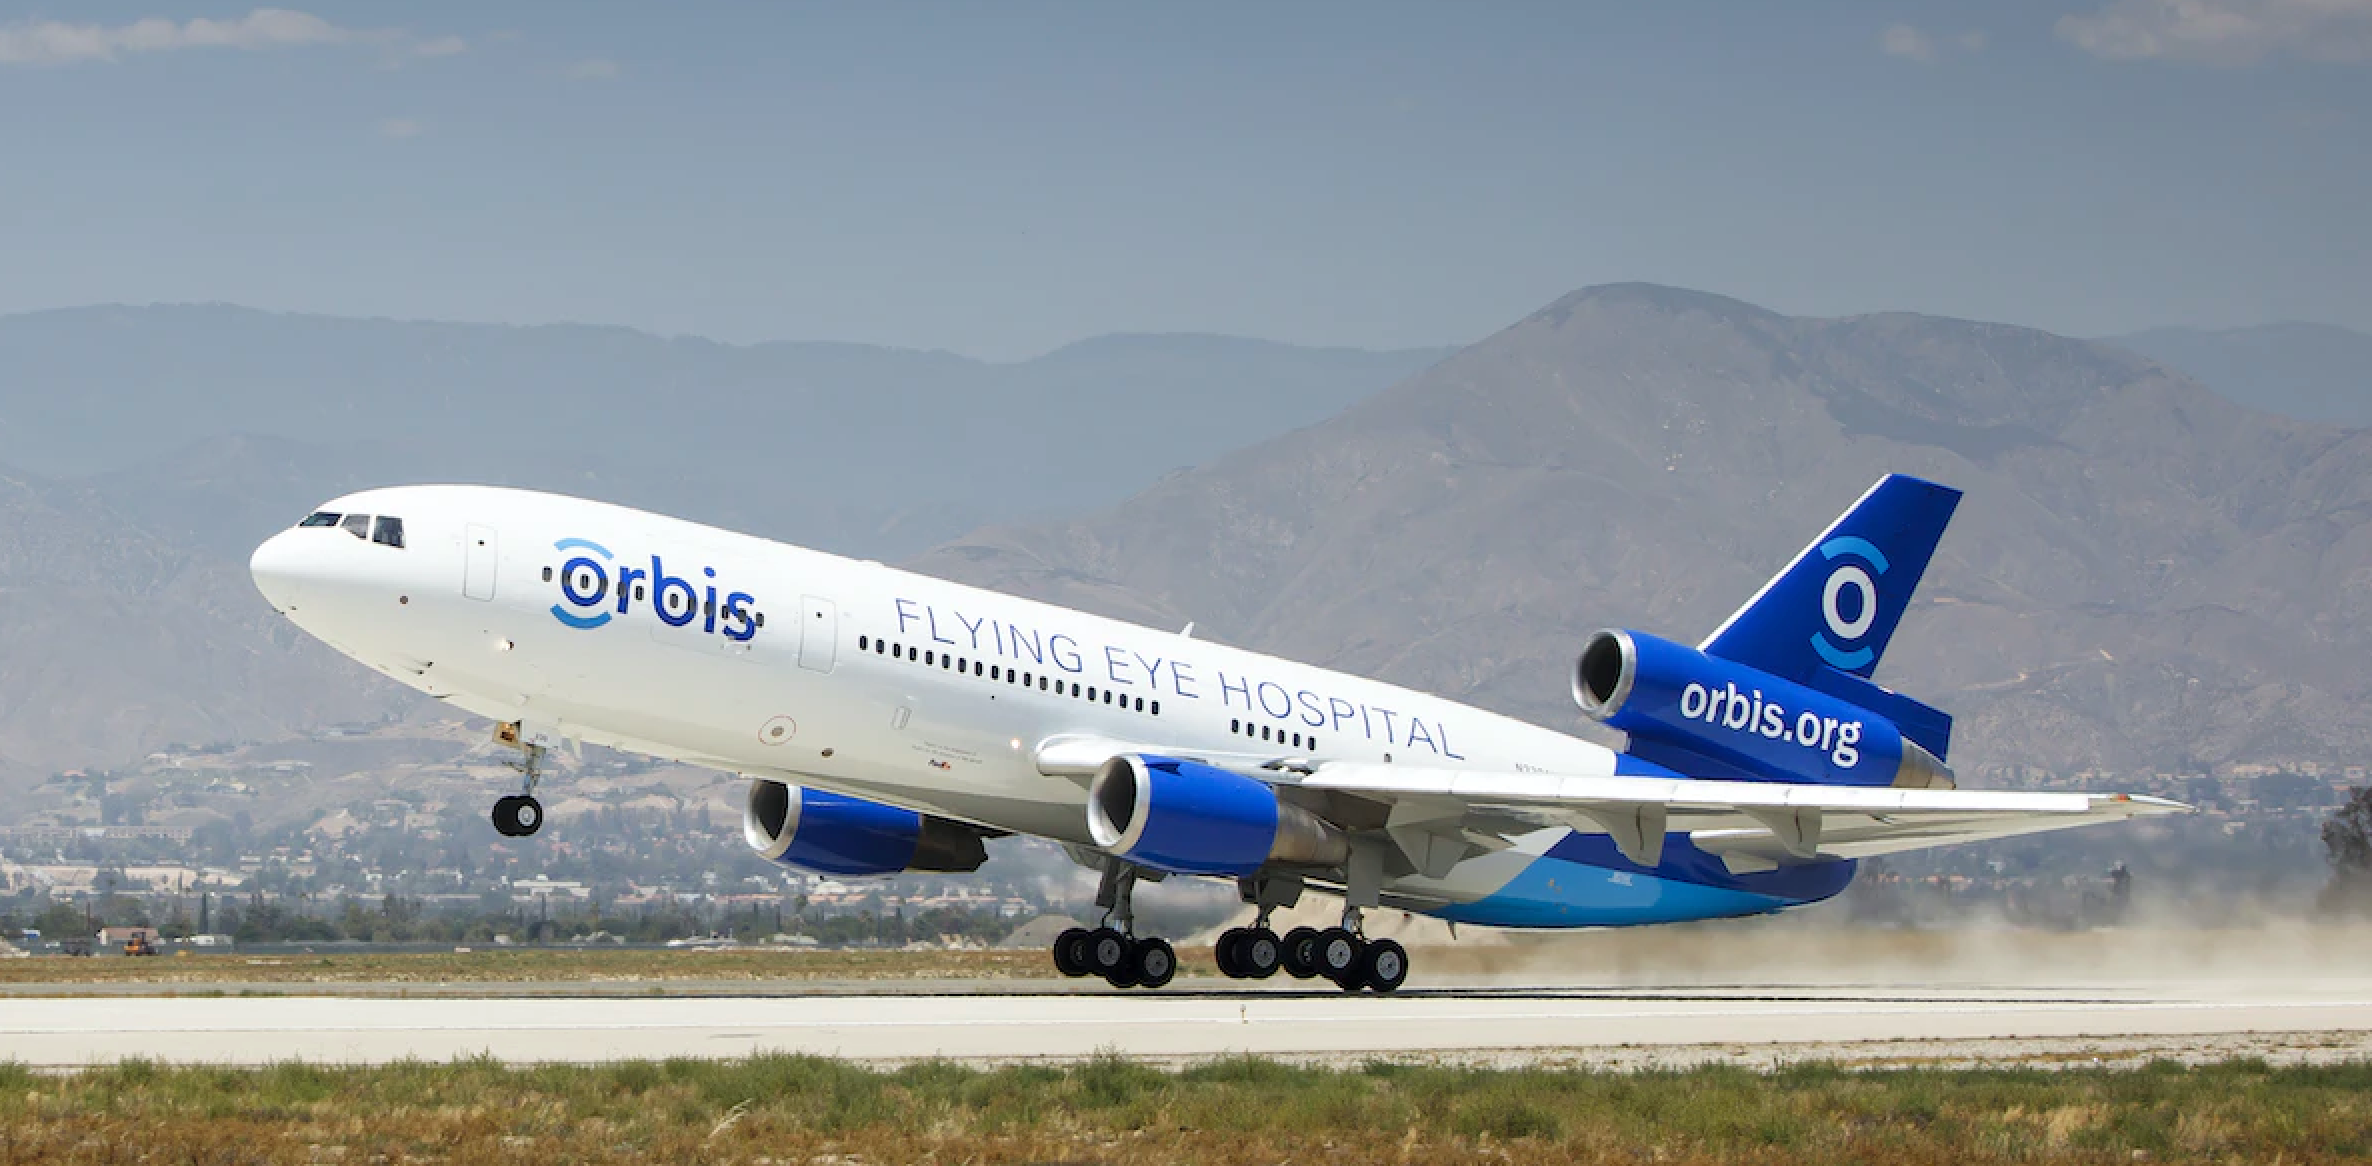 Boarding Orbis Flying Eye Hospital: Not your typical flight experience